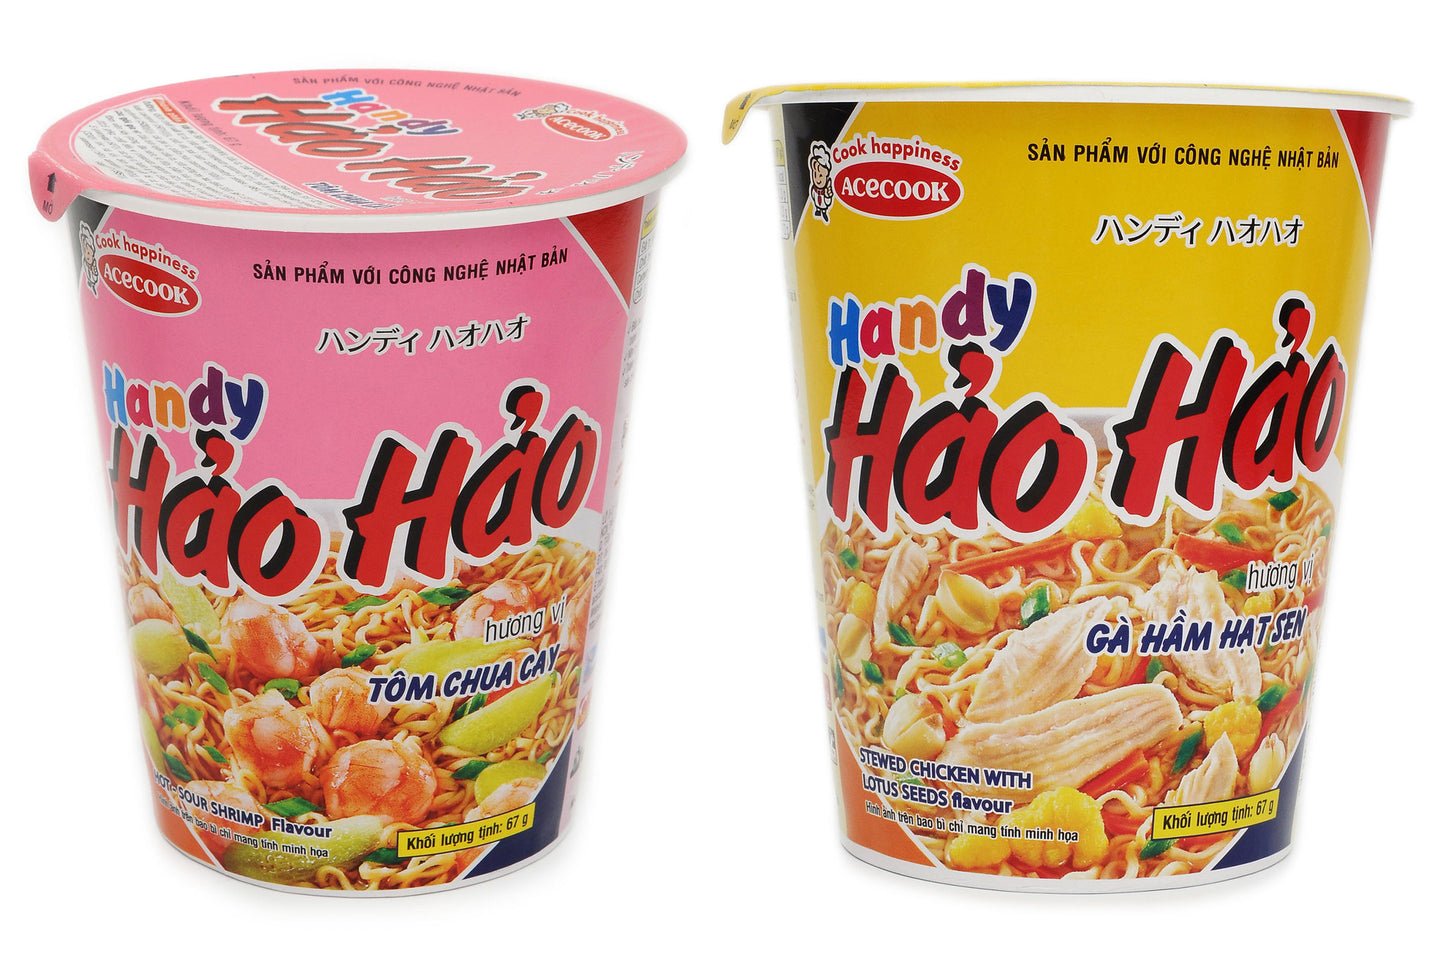 Acecook Handy Hao Hao Instant Cup Noodles – Covenient Noodle in Busy Life